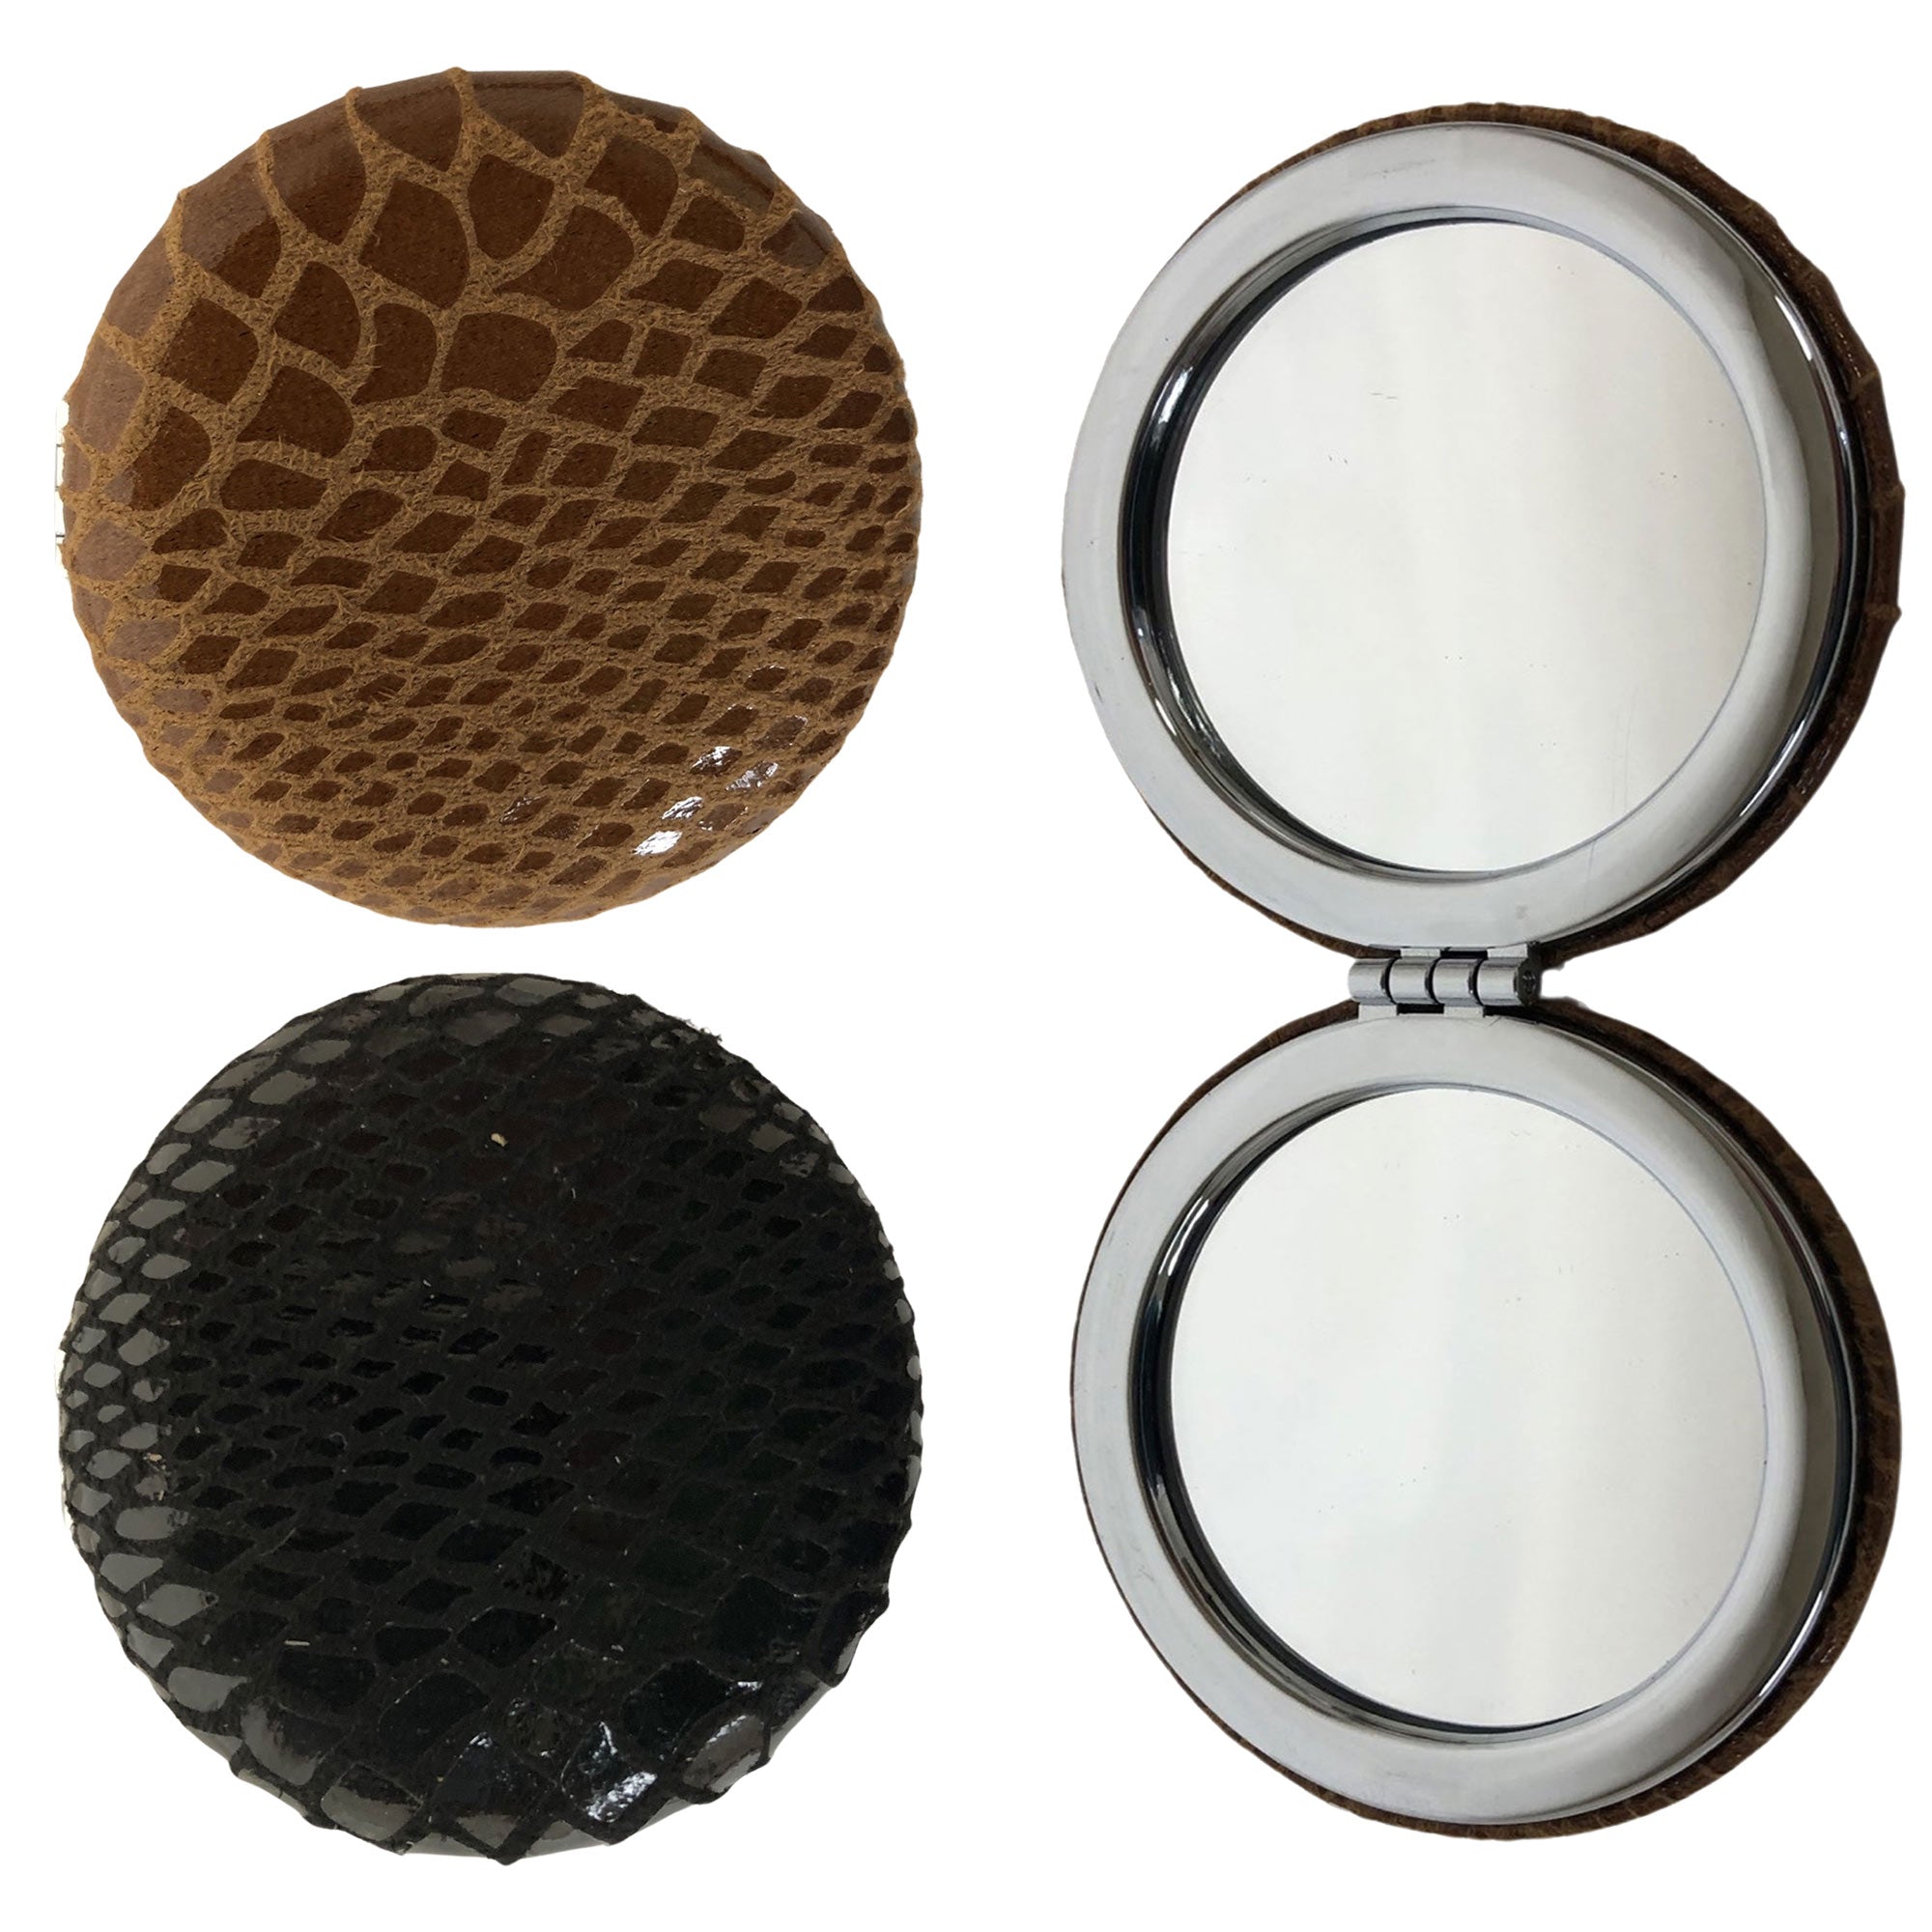 CLEARANCE ROUND COSMETIC SNAKE PRINTS (CASE OF 48 - $1.50 / PIECE)  Wholesale Cosmetic Mirrors in Assorted Prints SKU: 909-SNK-48